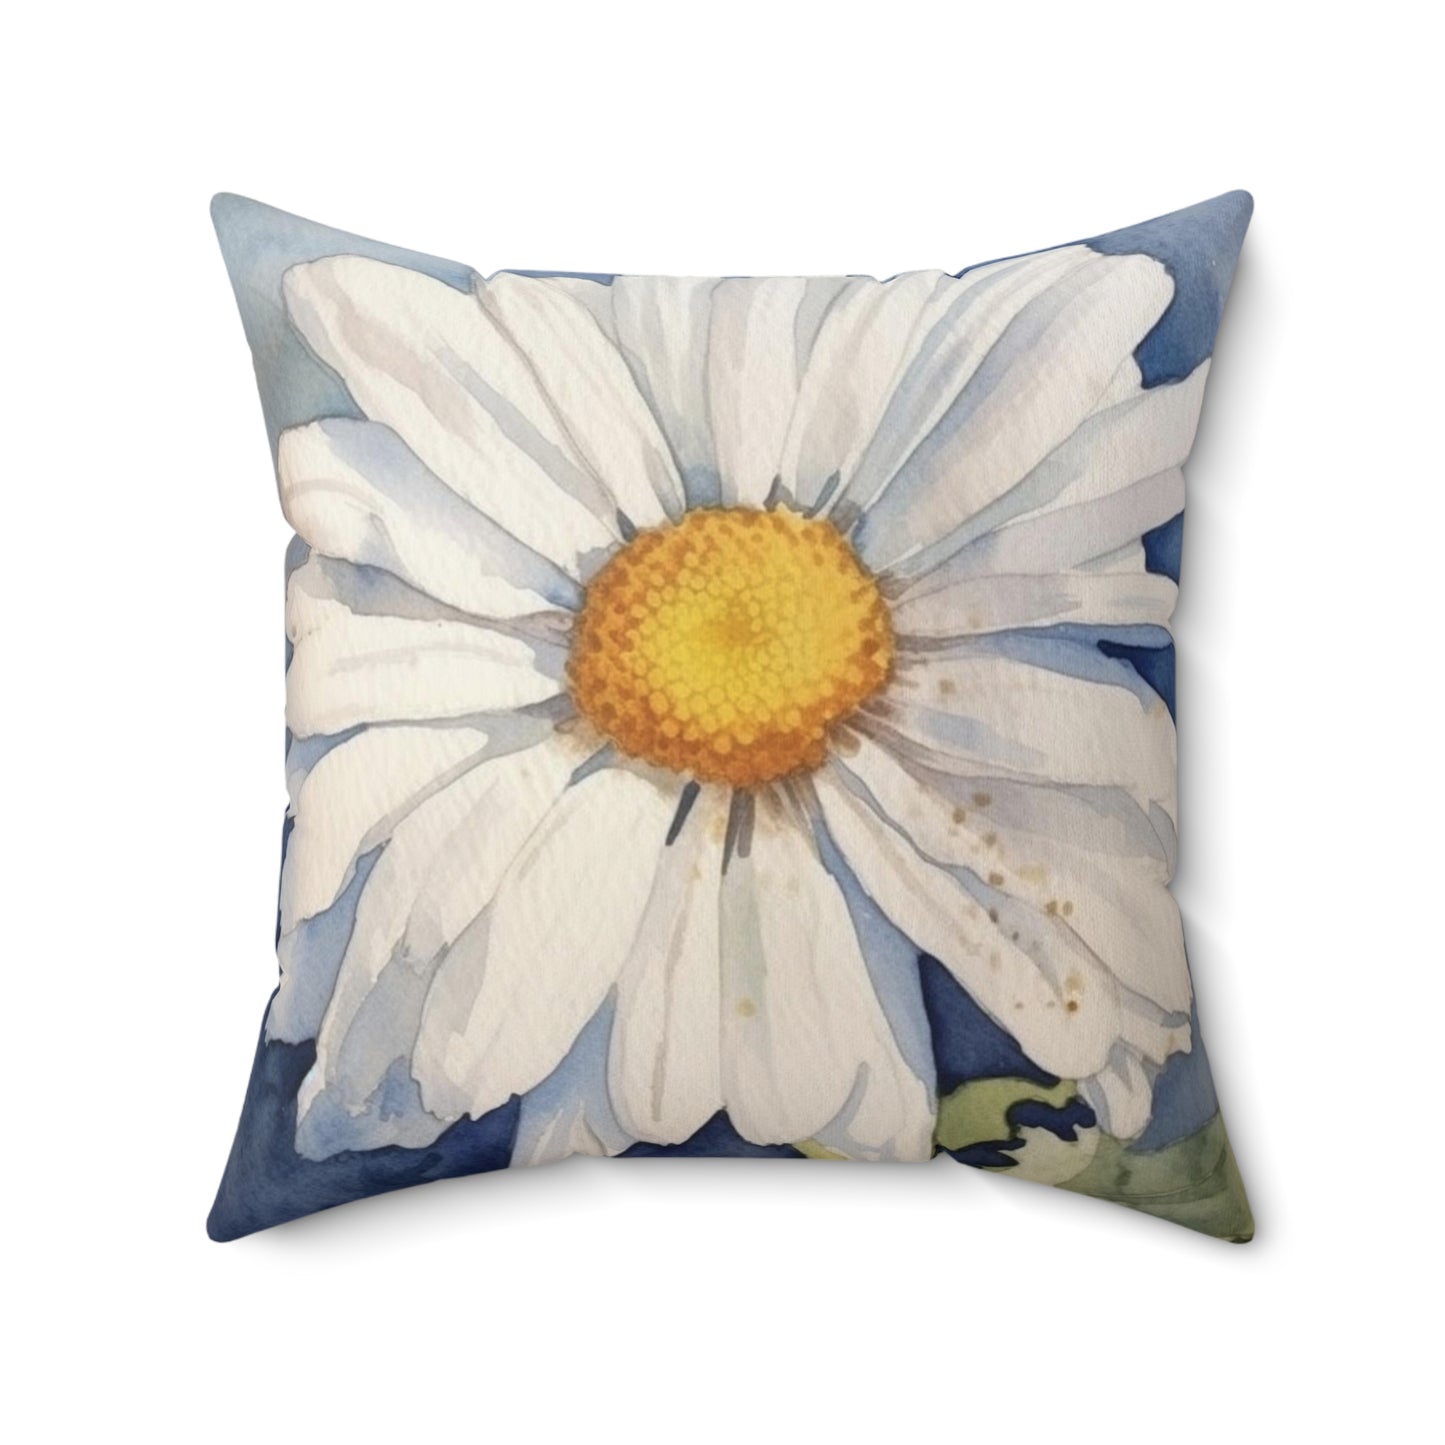 Daisy Filled Pillow with Insert, Floral White Flower Square Throw Accent Decorative Room Decor Floor Sofa Couch Cushion